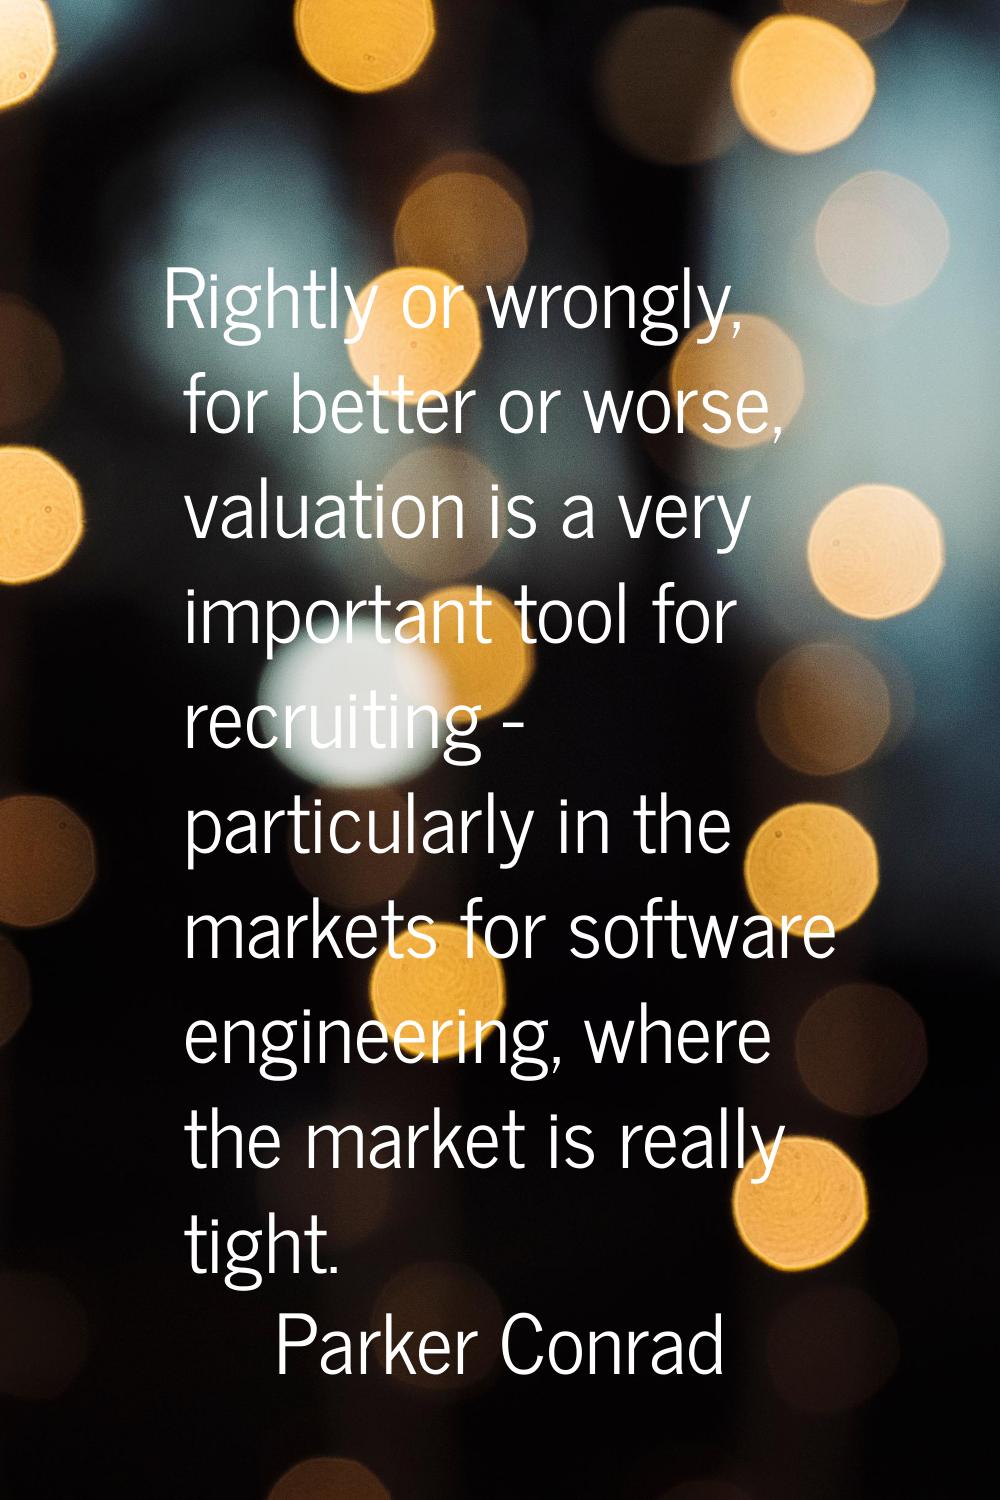 Rightly or wrongly, for better or worse, valuation is a very important tool for recruiting - partic